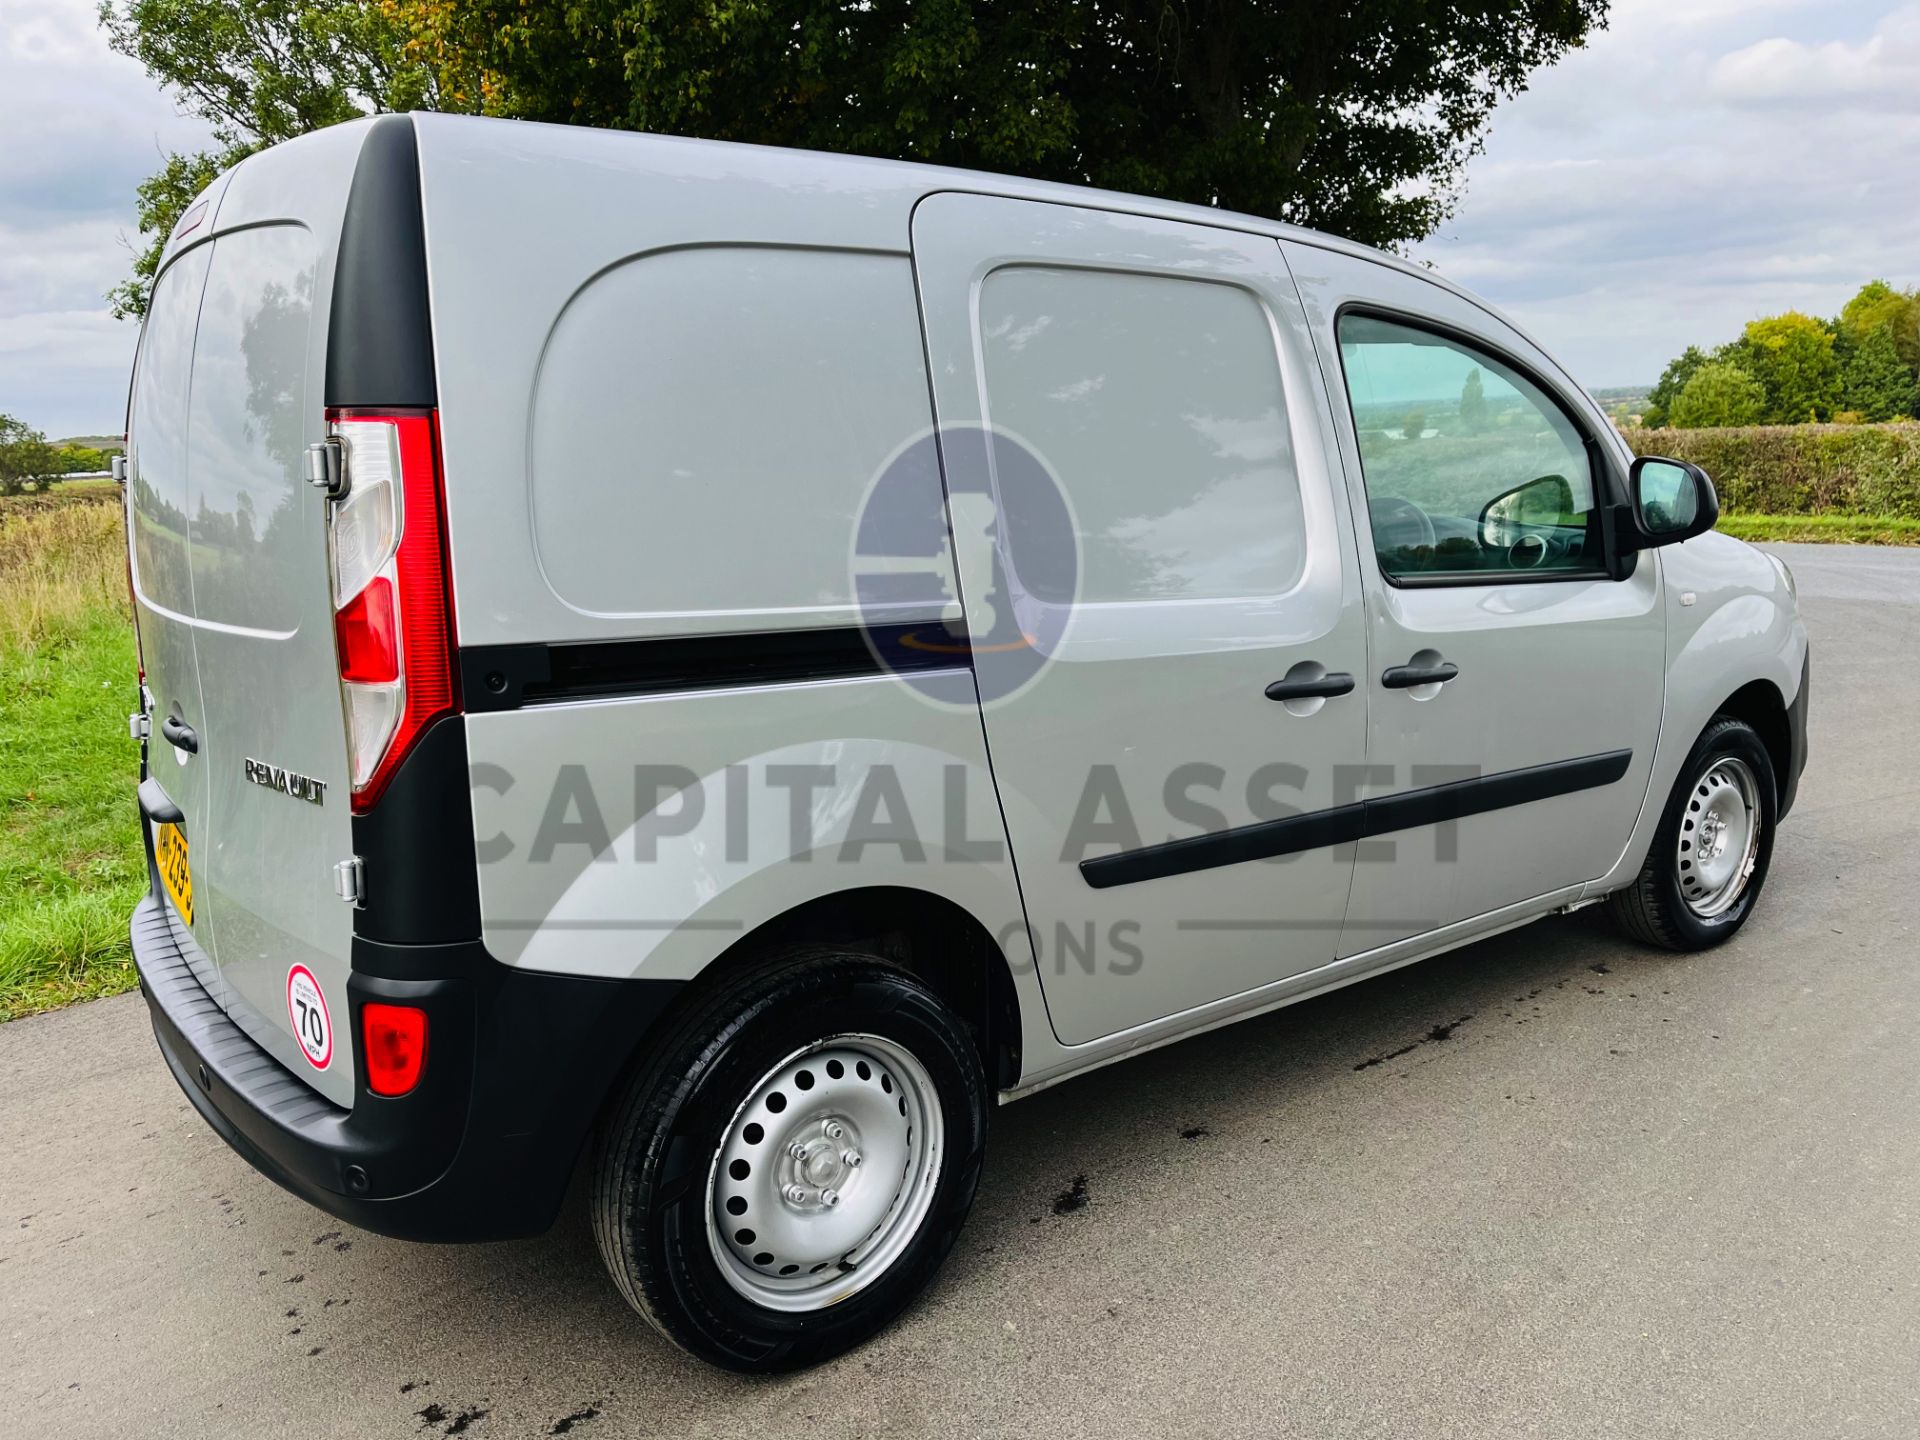 RENAULT KANGOO 1.5DCI "BUSINESS EDITION" 2018 -EURO 6/STOP START (AIR CON) ELEC PACK-TWIN SIDE DOORS - Image 9 of 21